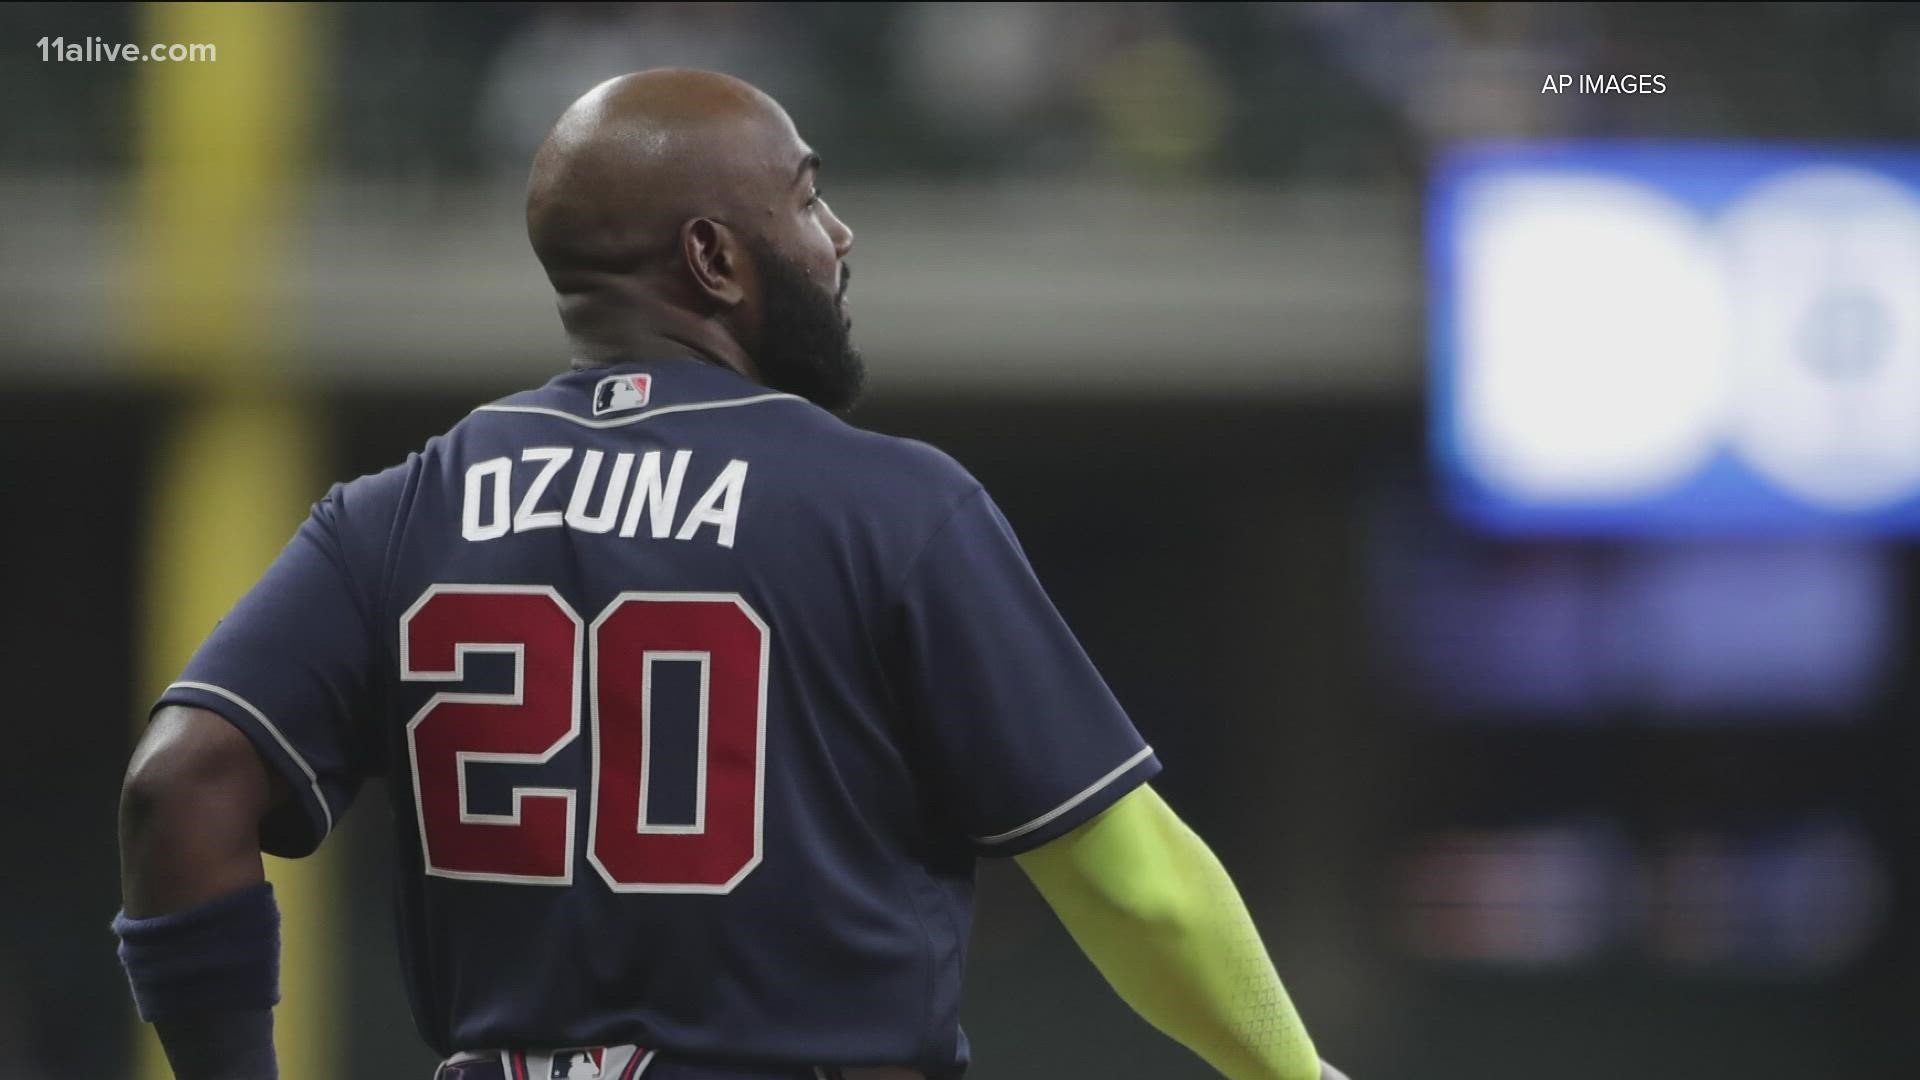 Atlanta Braves star Marcell Ozuna is returning much of last season's paycheck after the outfielder violated Major League Baseball's domestic violence policy.